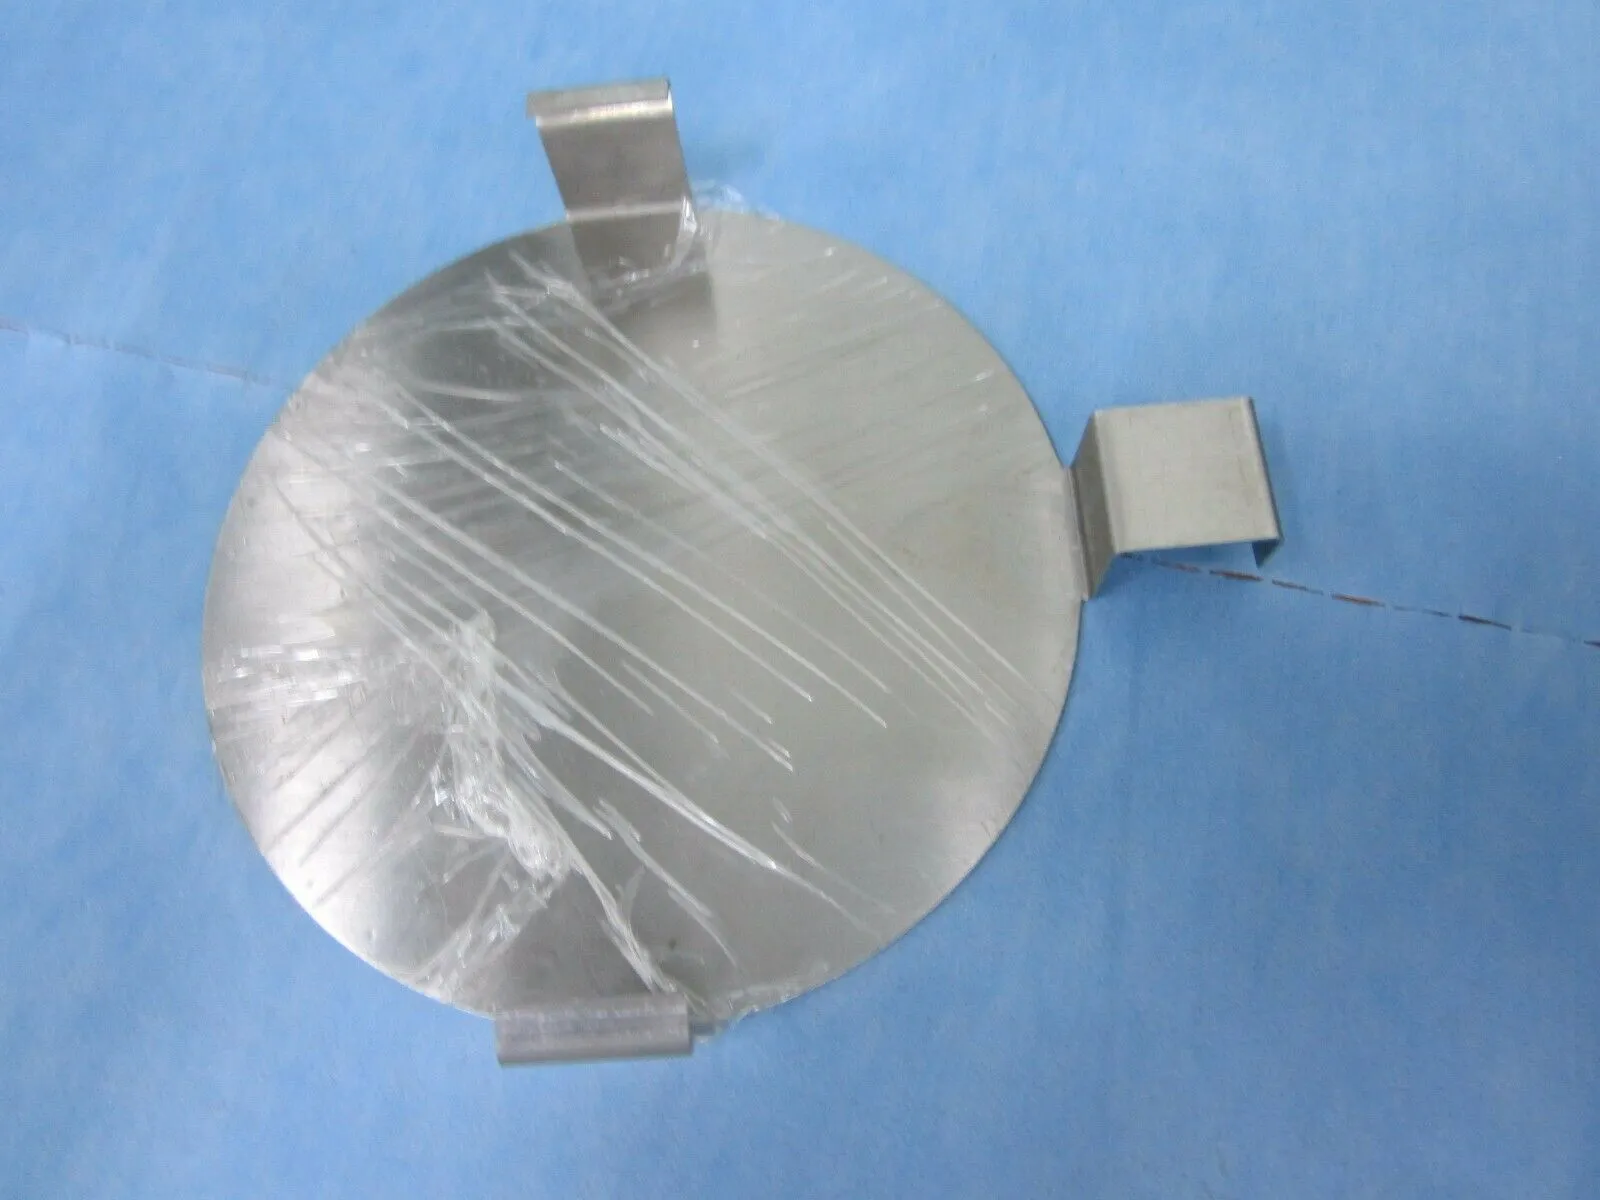 Details about   AMAT 0020-70732 VIEWPORT COVER  PVD CHAMBER 